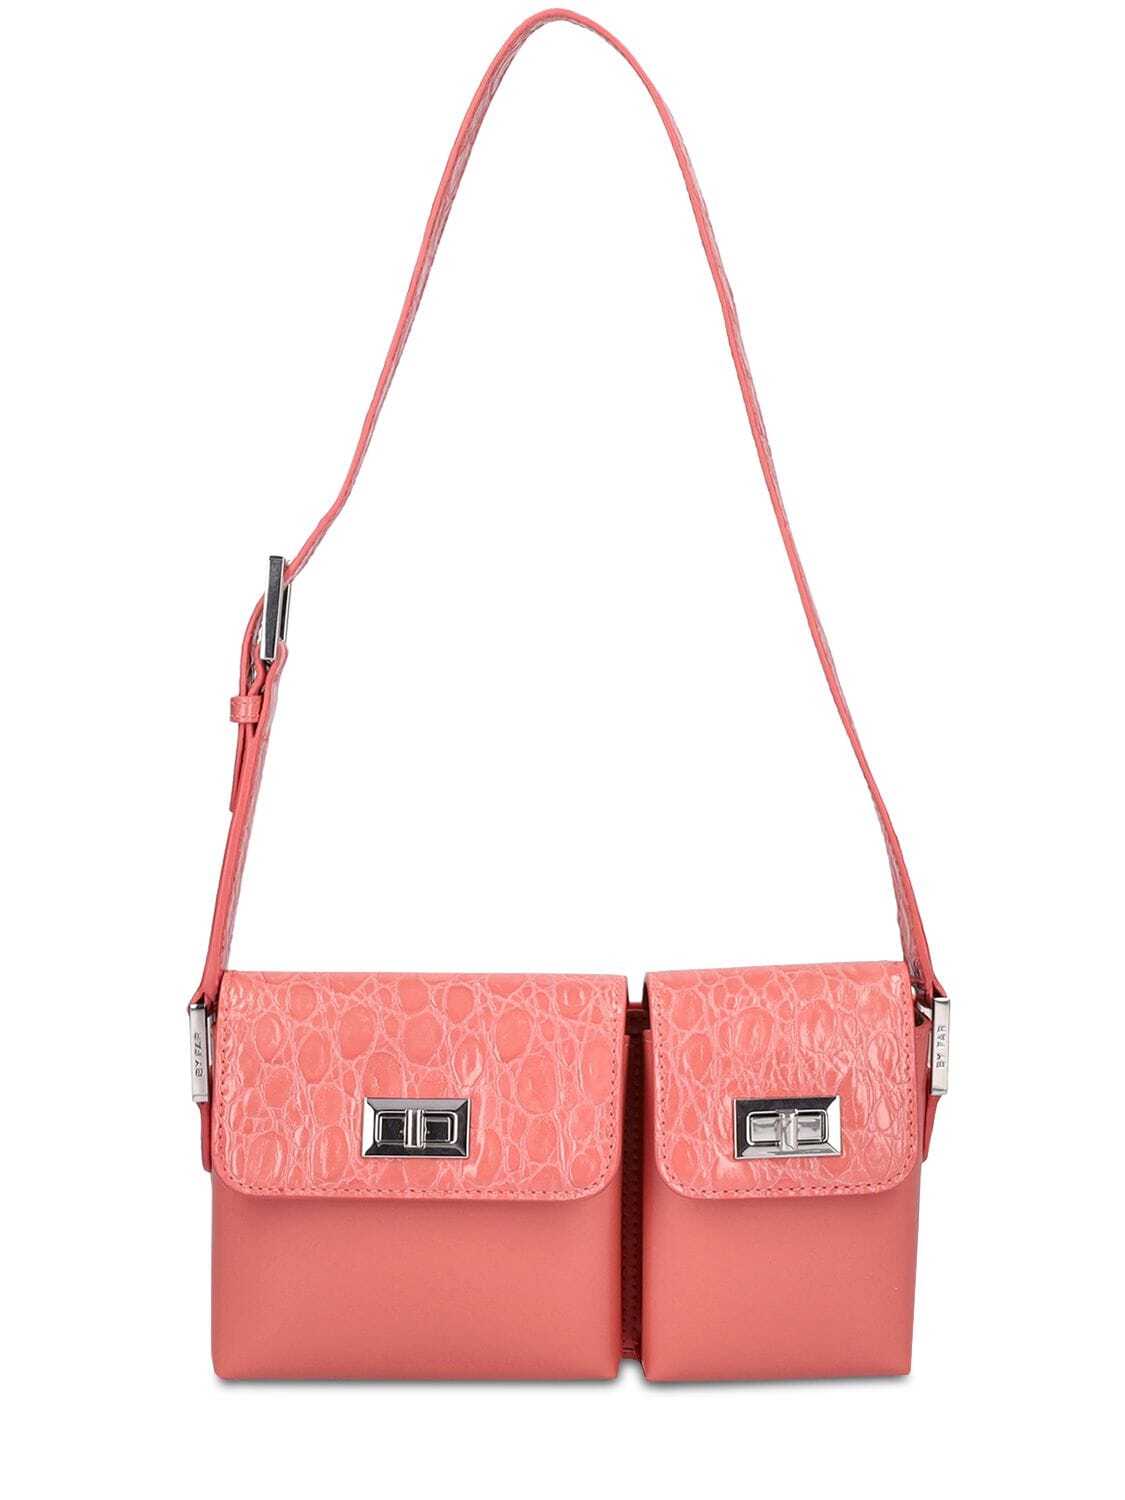 BY FAR Baby Billy Croc & Semi Patent Bag in pink